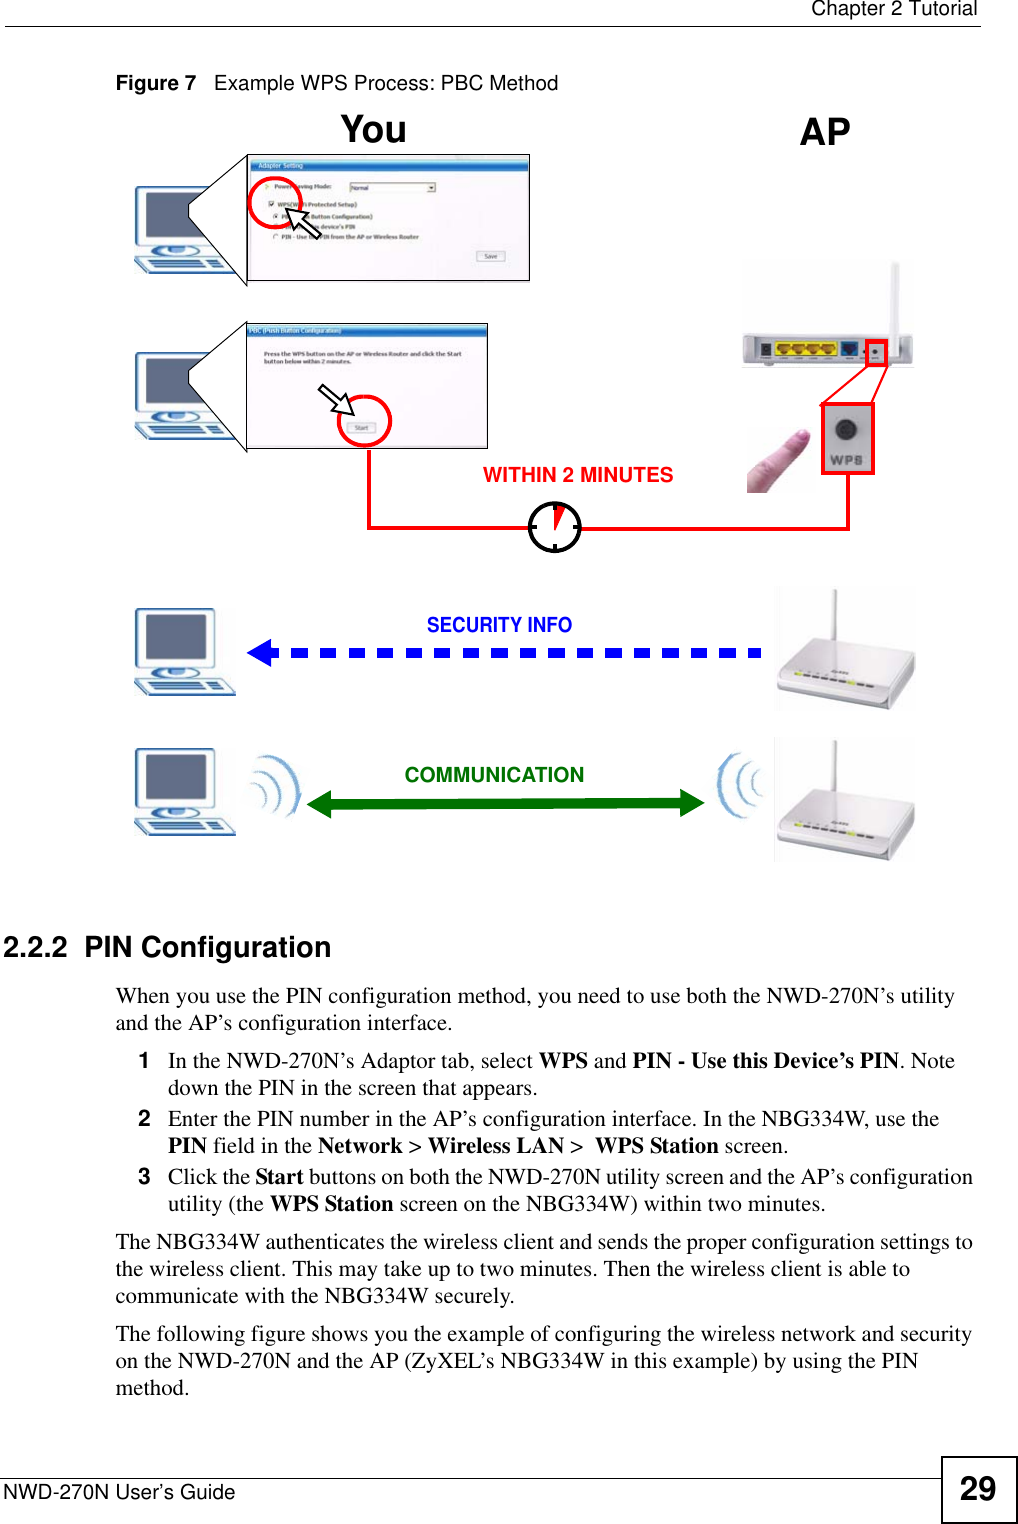  Chapter 2 TutorialNWD-270N User’s Guide 29Figure 7   Example WPS Process: PBC Method2.2.2  PIN ConfigurationWhen you use the PIN configuration method, you need to use both the NWD-270N’s utility and the AP’s configuration interface.1In the NWD-270N’s Adaptor tab, select WPS and PIN - Use this Device’s PIN. Note down the PIN in the screen that appears. 2Enter the PIN number in the AP’s configuration interface. In the NBG334W, use the PIN field in the Network &gt; Wireless LAN &gt;  WPS Station screen. 3Click the Start buttons on both the NWD-270N utility screen and the AP’s configuration utility (the WPS Station screen on the NBG334W) within two minutes. The NBG334W authenticates the wireless client and sends the proper configuration settings to the wireless client. This may take up to two minutes. Then the wireless client is able to communicate with the NBG334W securely. The following figure shows you the example of configuring the wireless network and security on the NWD-270N and the AP (ZyXEL’s NBG334W in this example) by using the PIN method. You APSECURITY INFOCOMMUNICATIONWITHIN 2 MINUTES